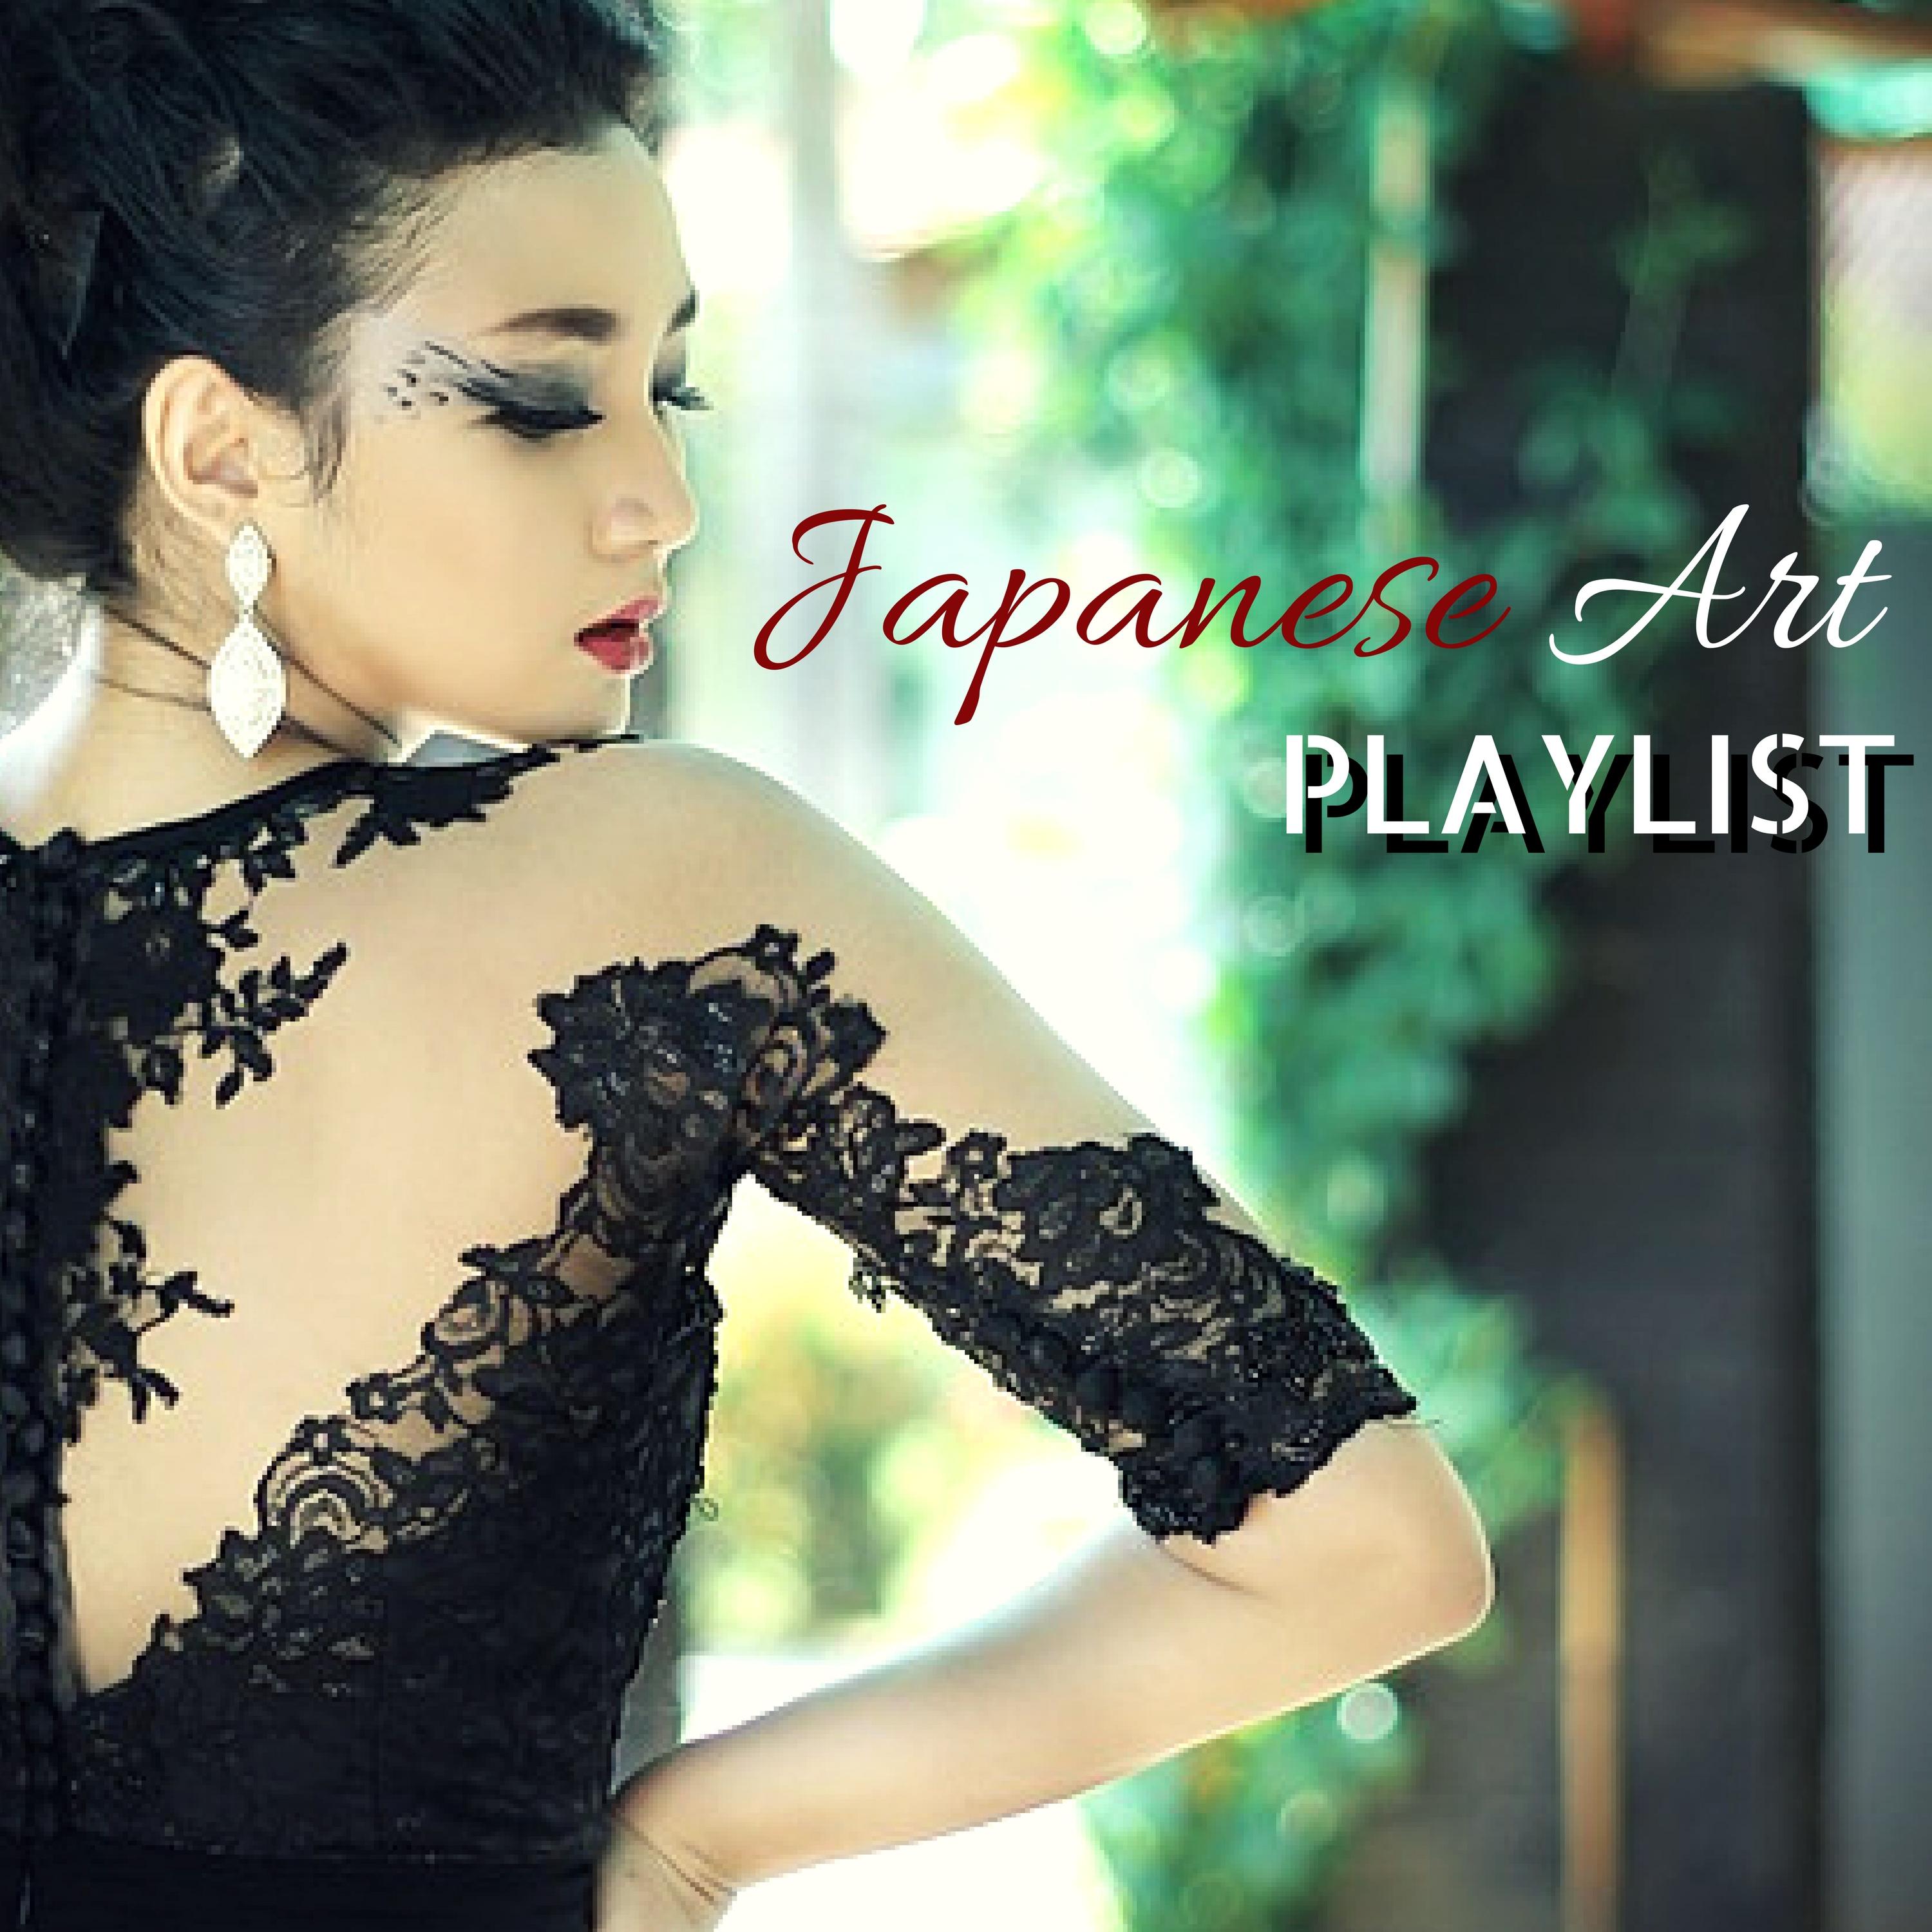 Japanese Art Playlist - Lounge & Electro Music for Luxury Oriental Bar and Cocktail Party